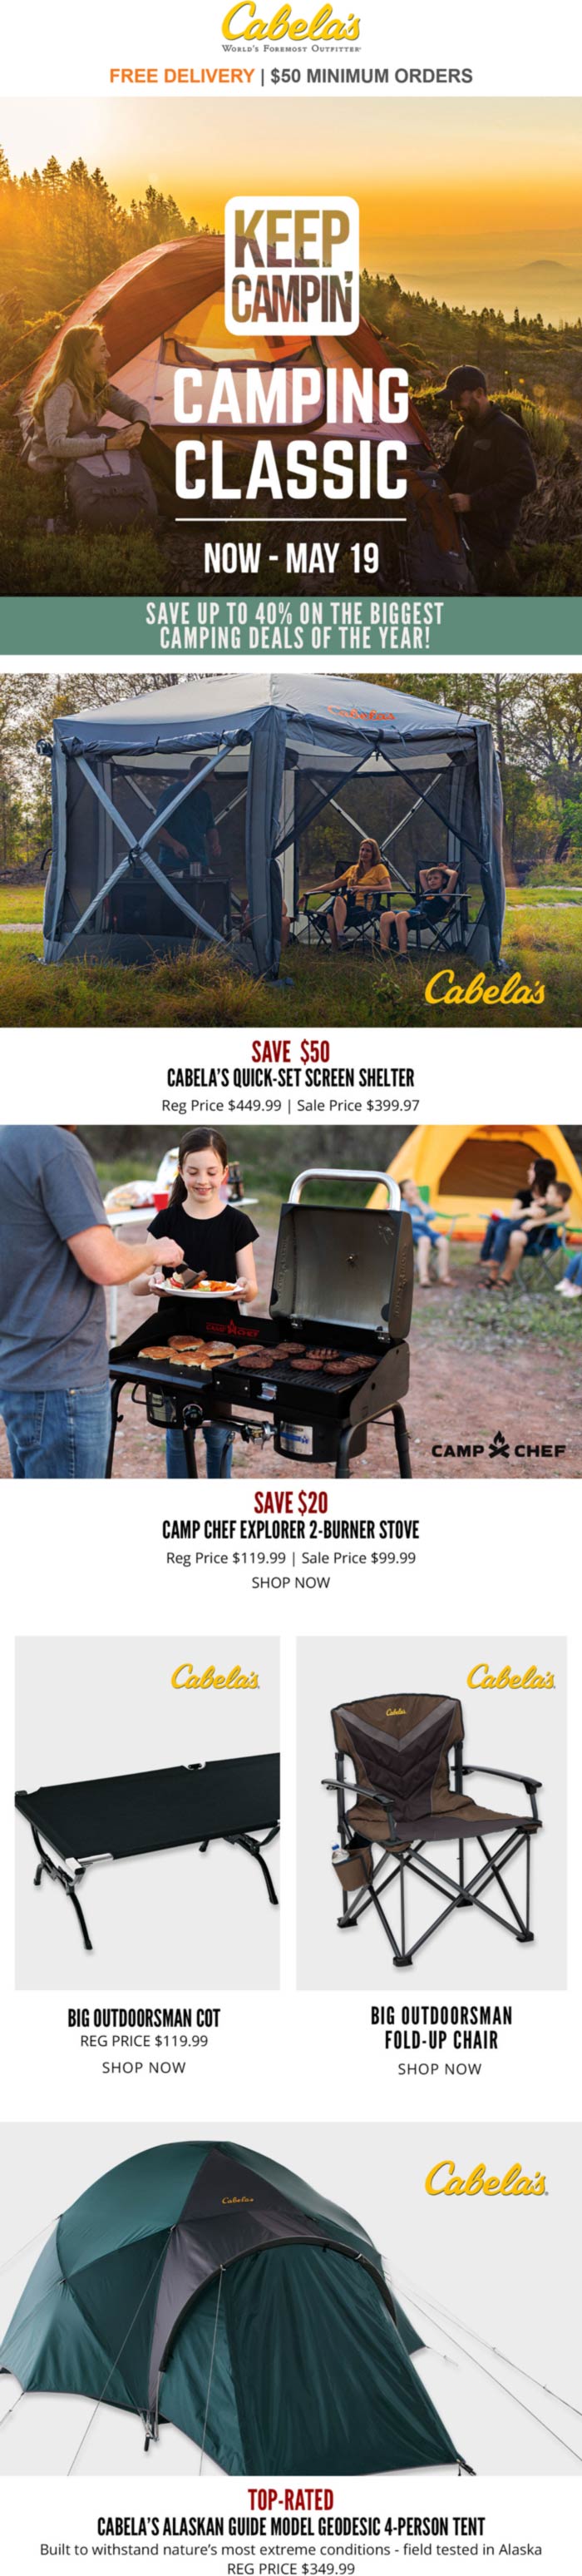 Various 40% off camping deals at Cabelas outdoors outfitter #cabelas